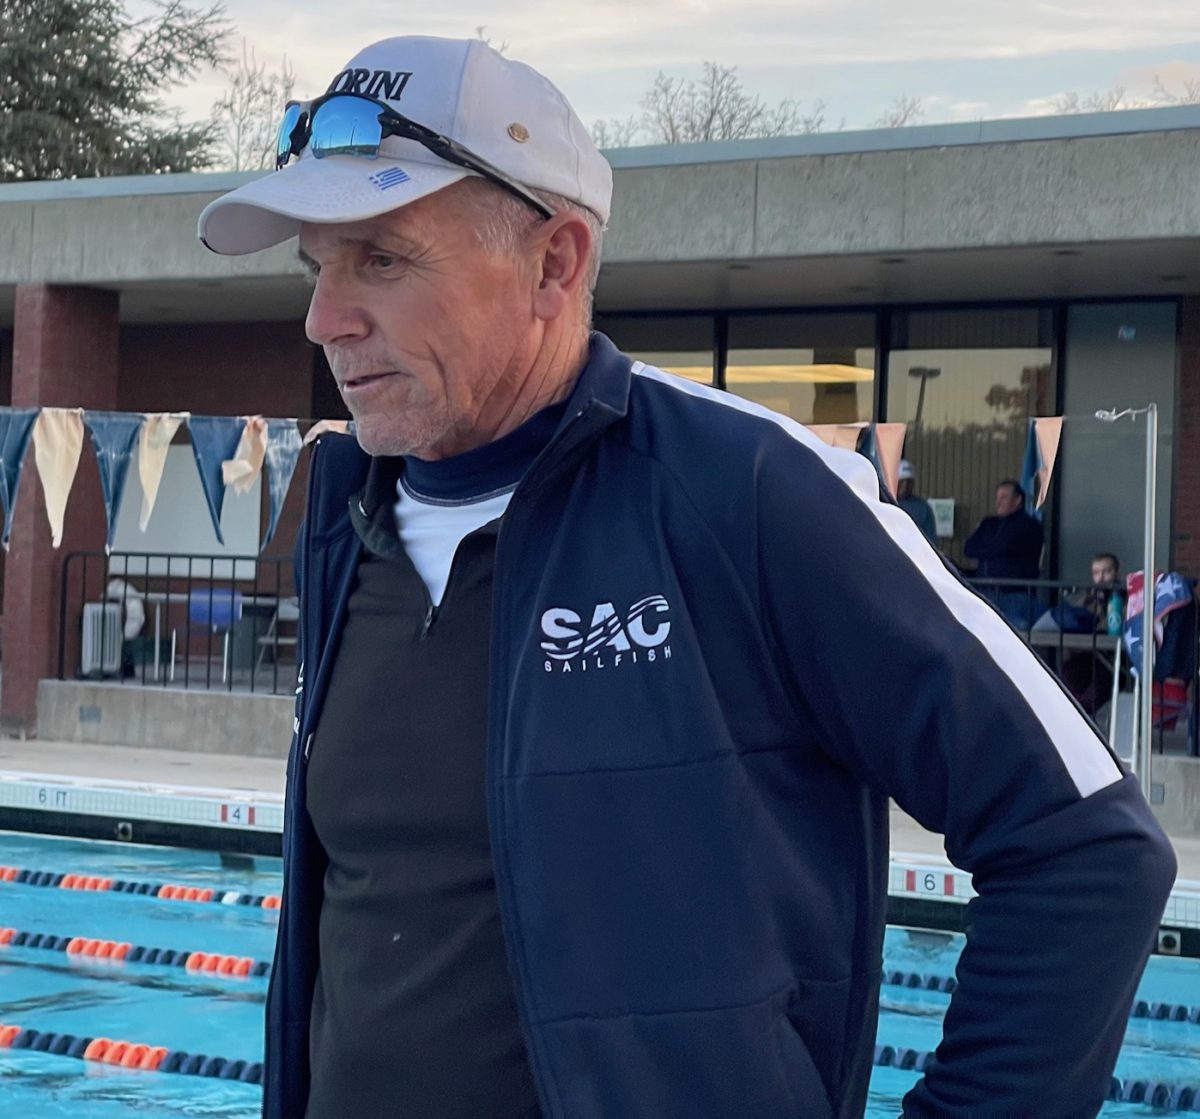 The+athletics+department+has+hired+Terry+Peyton+to+be+the+new+swim+and+dive+head+coach%2C+according+to+a+news+release+from+CRC+Athletics+in+November.+Peyton+is+tasked+with+building+CRCs+first+mens+swim+team+in+school+history.